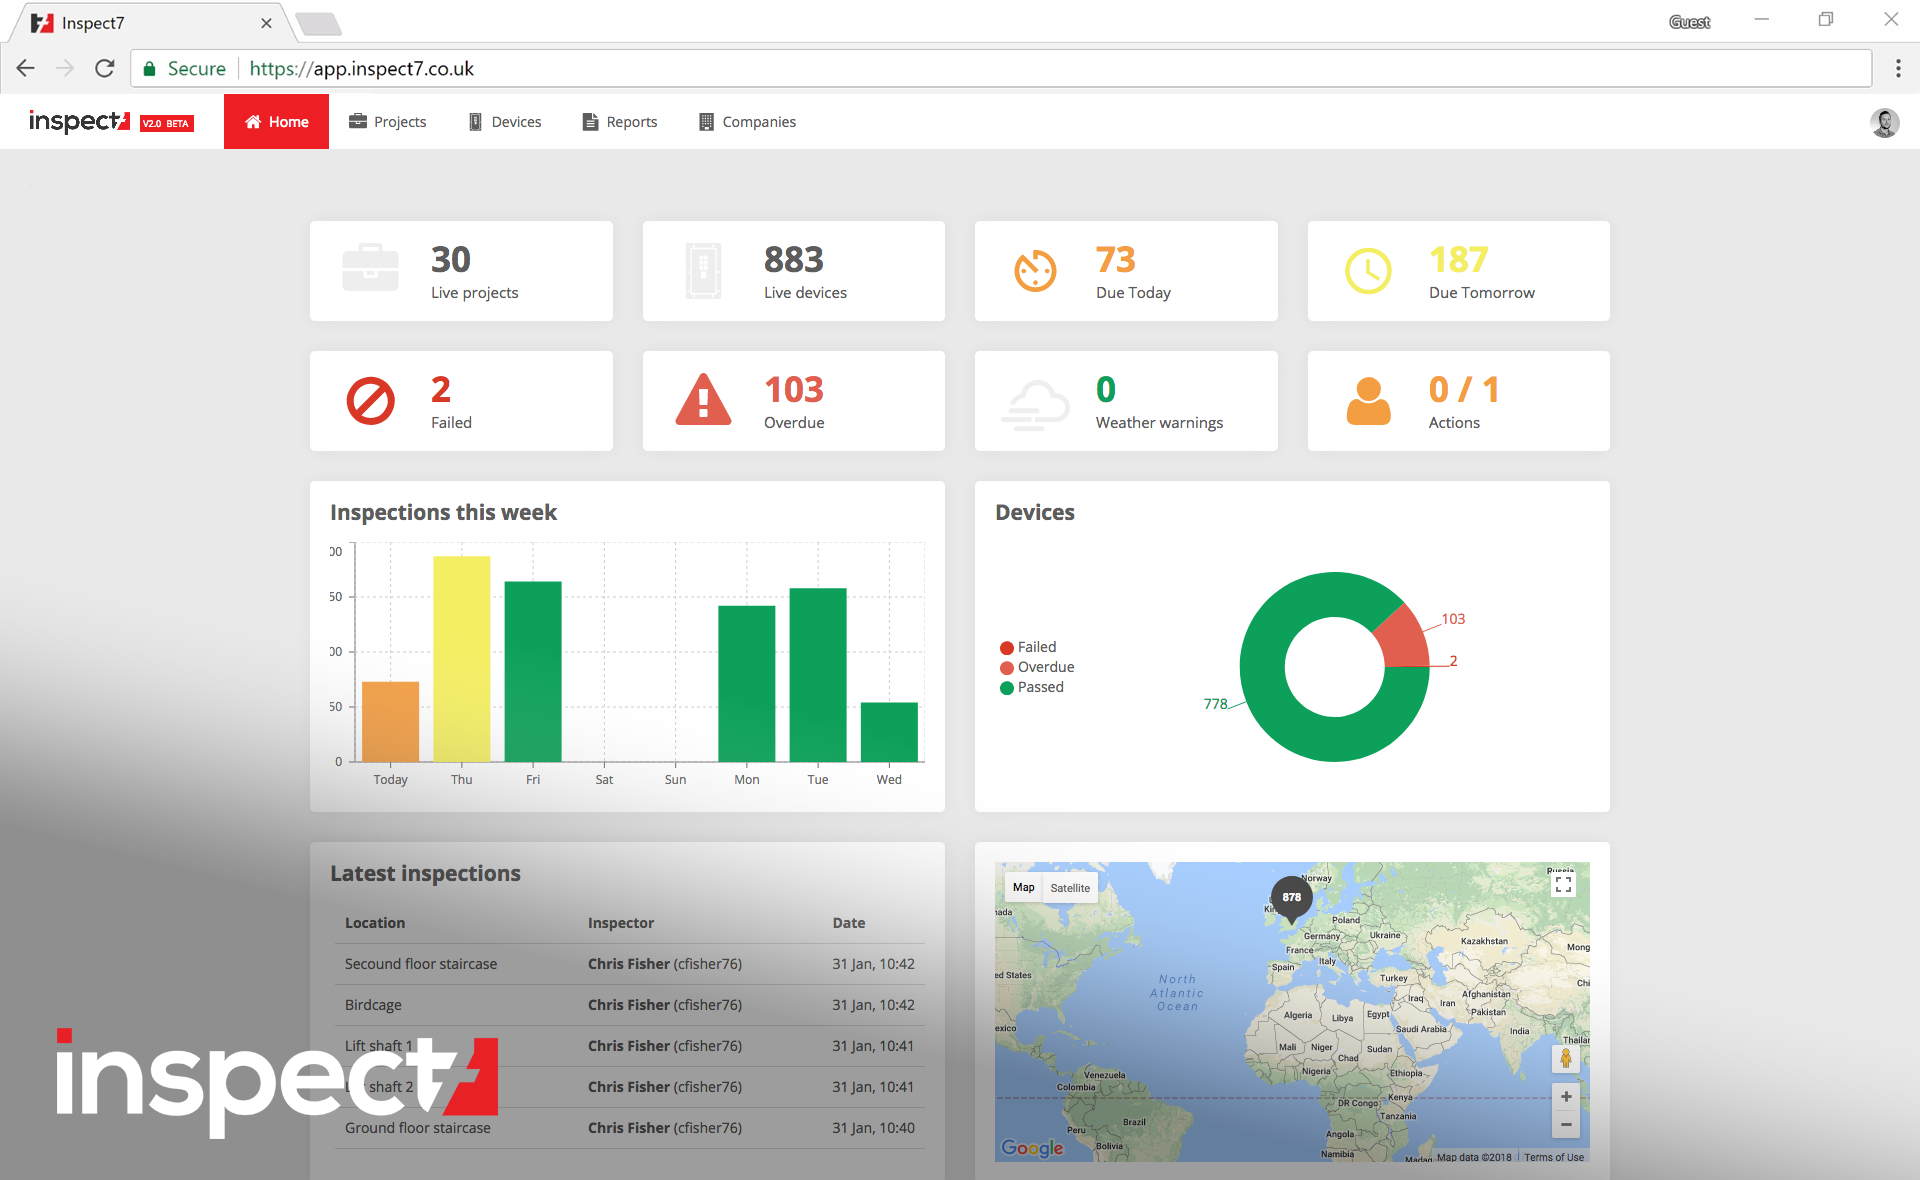 image of the inspect7 portal dashboard